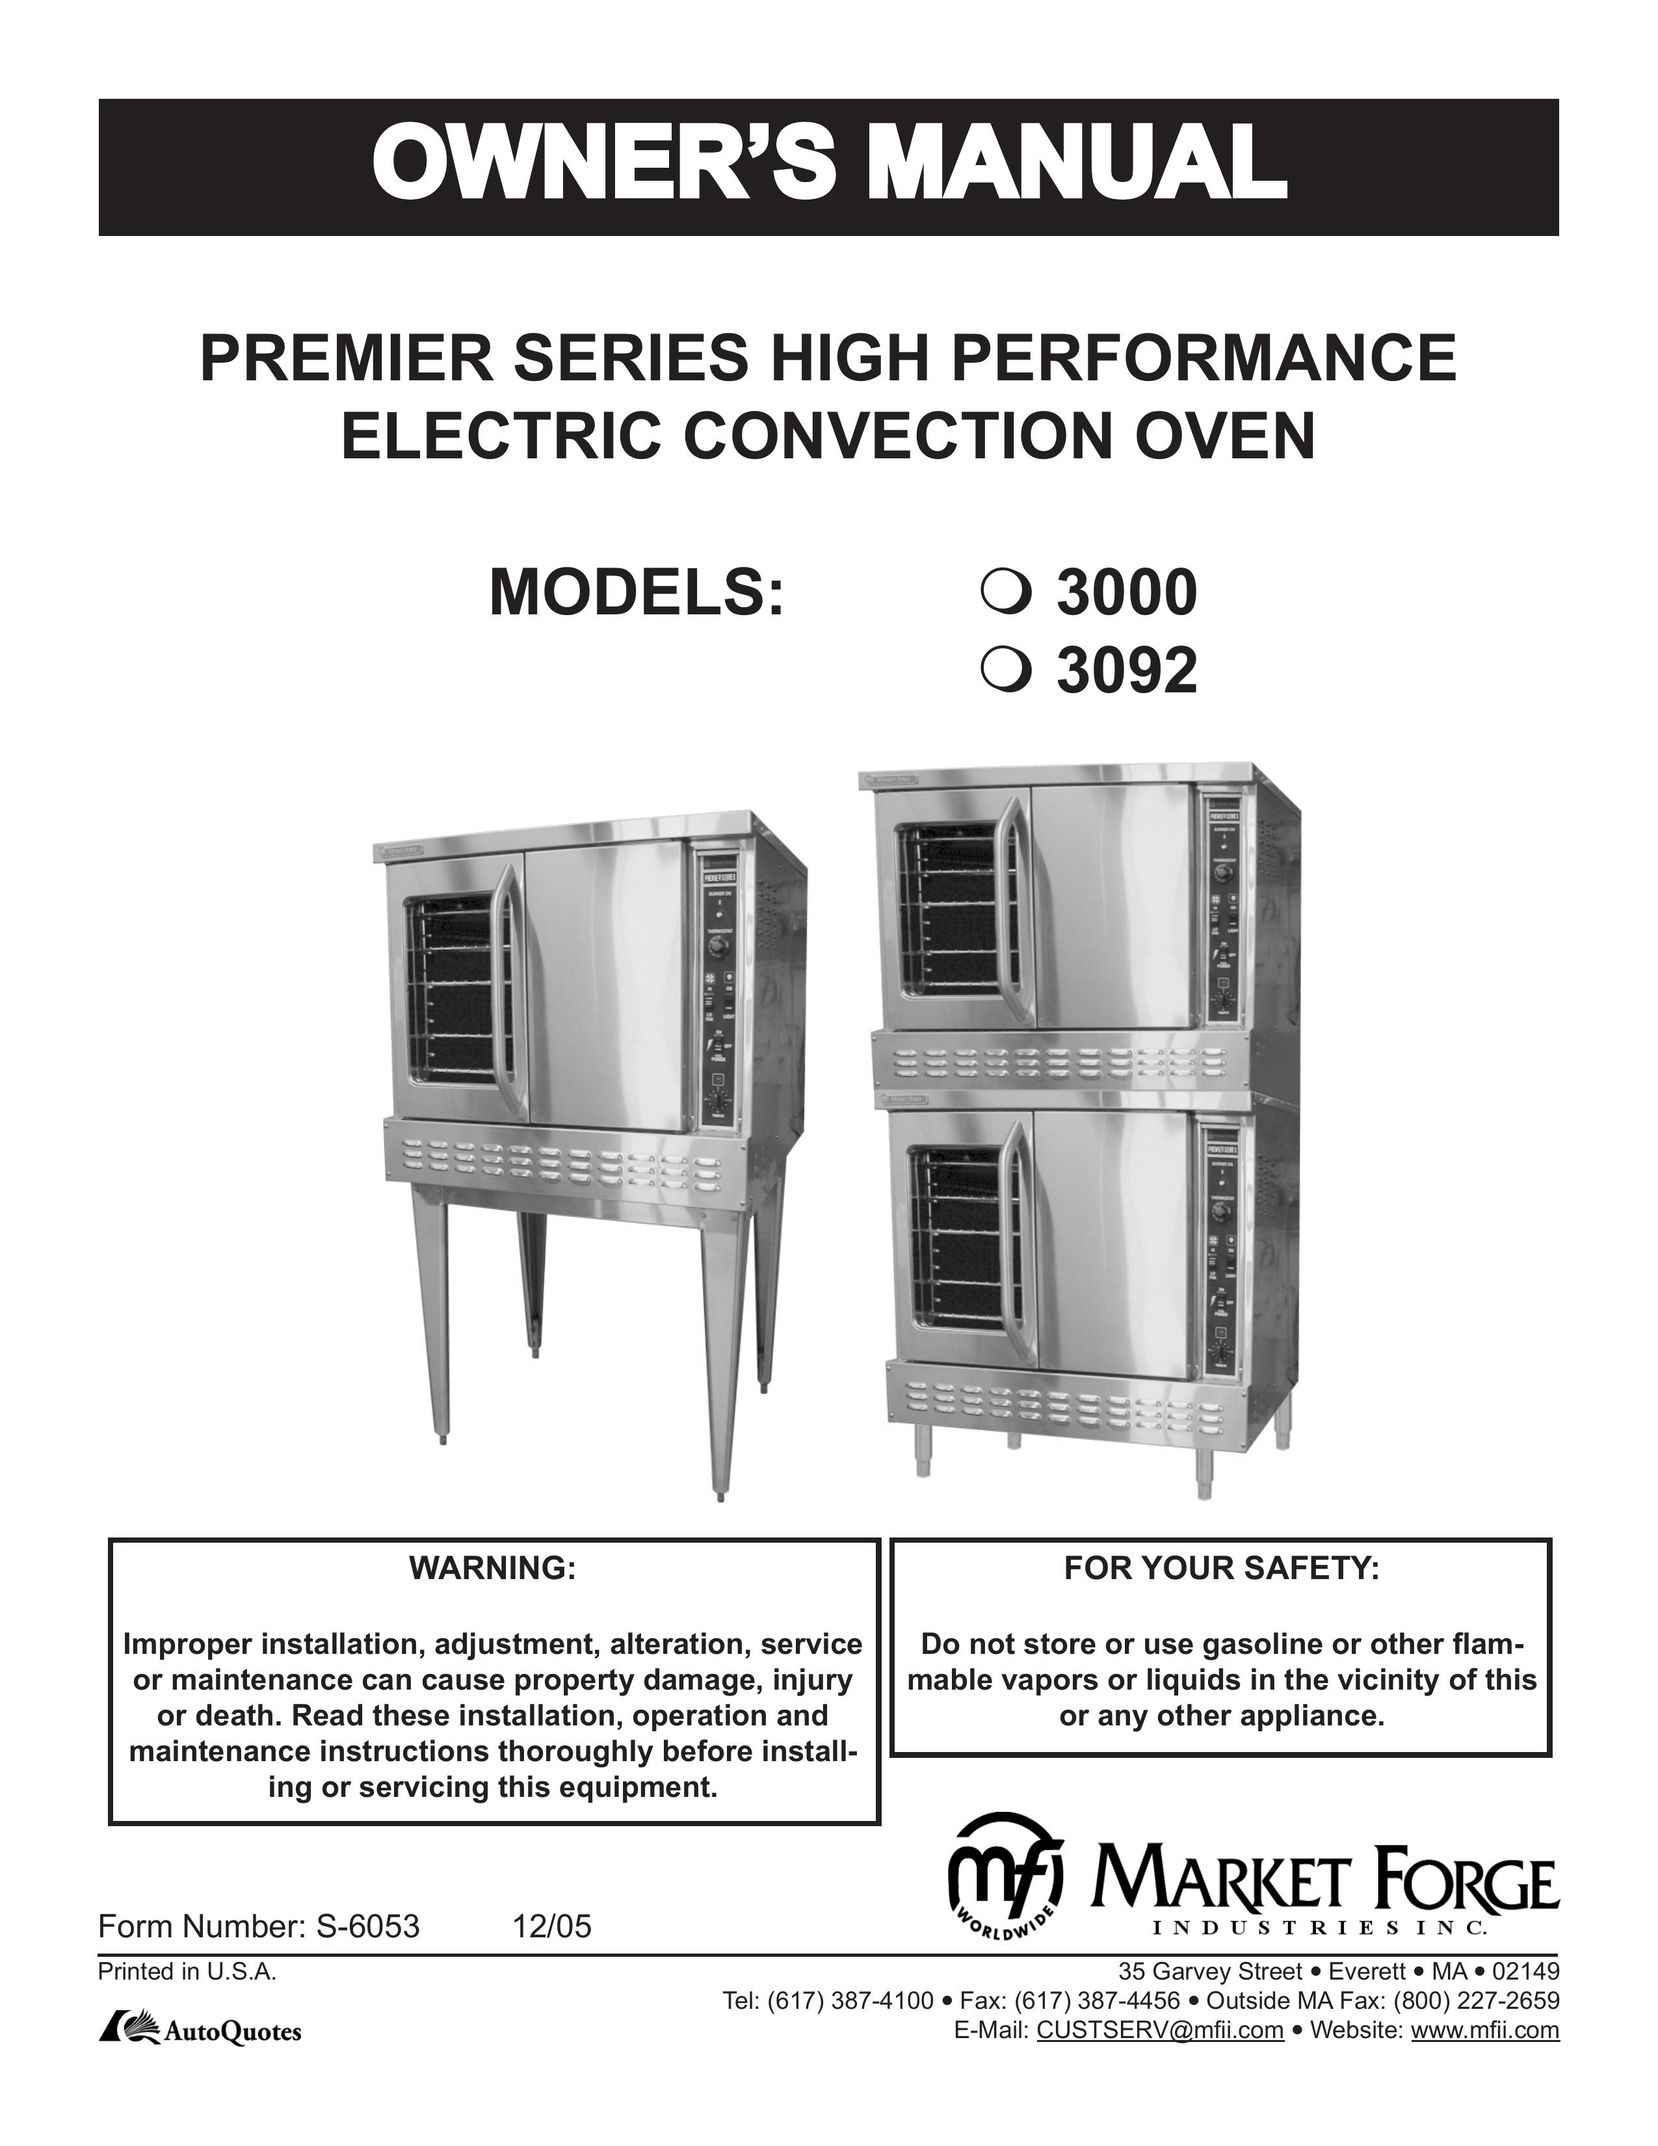 Market Forge Industries M 3092 Convection Oven User Manual